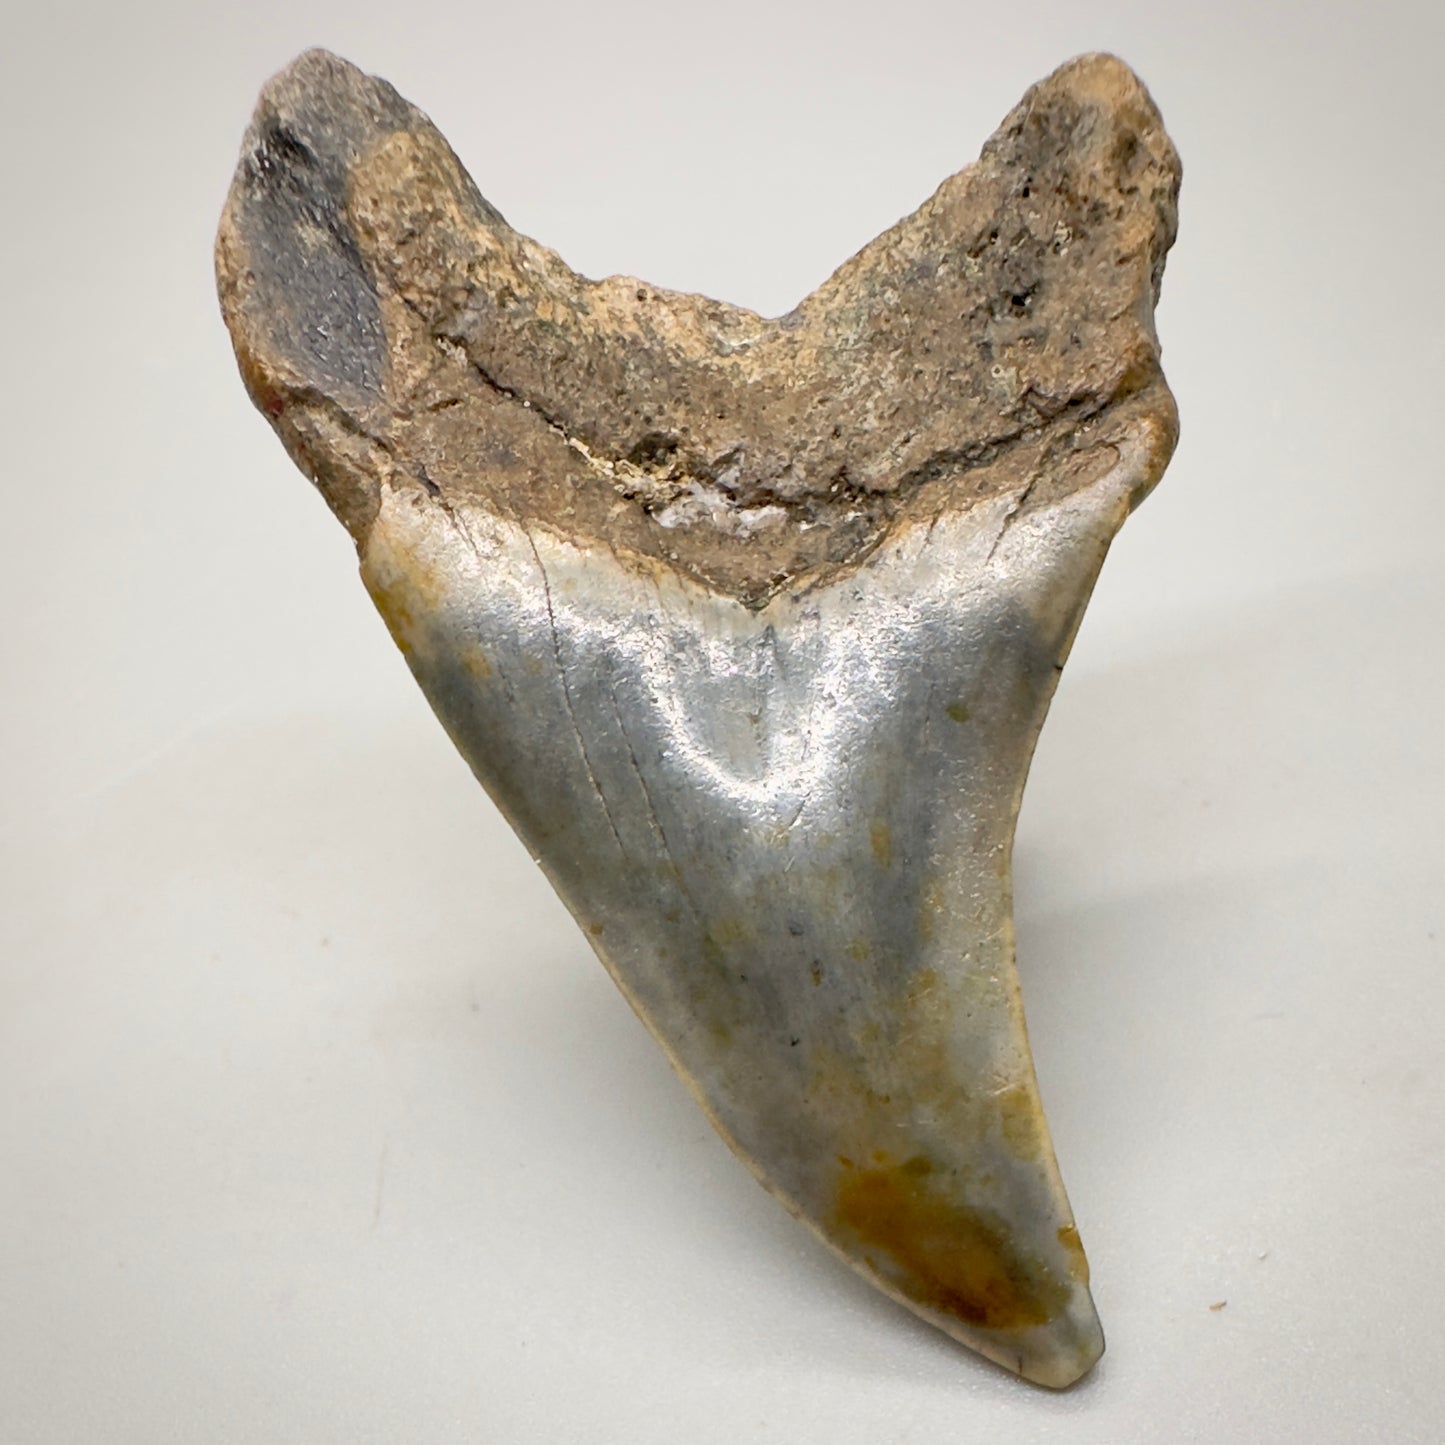 2.33 inches Paratodus benedeni fossil shark tooth from Wilmington North Carolina R500 back down